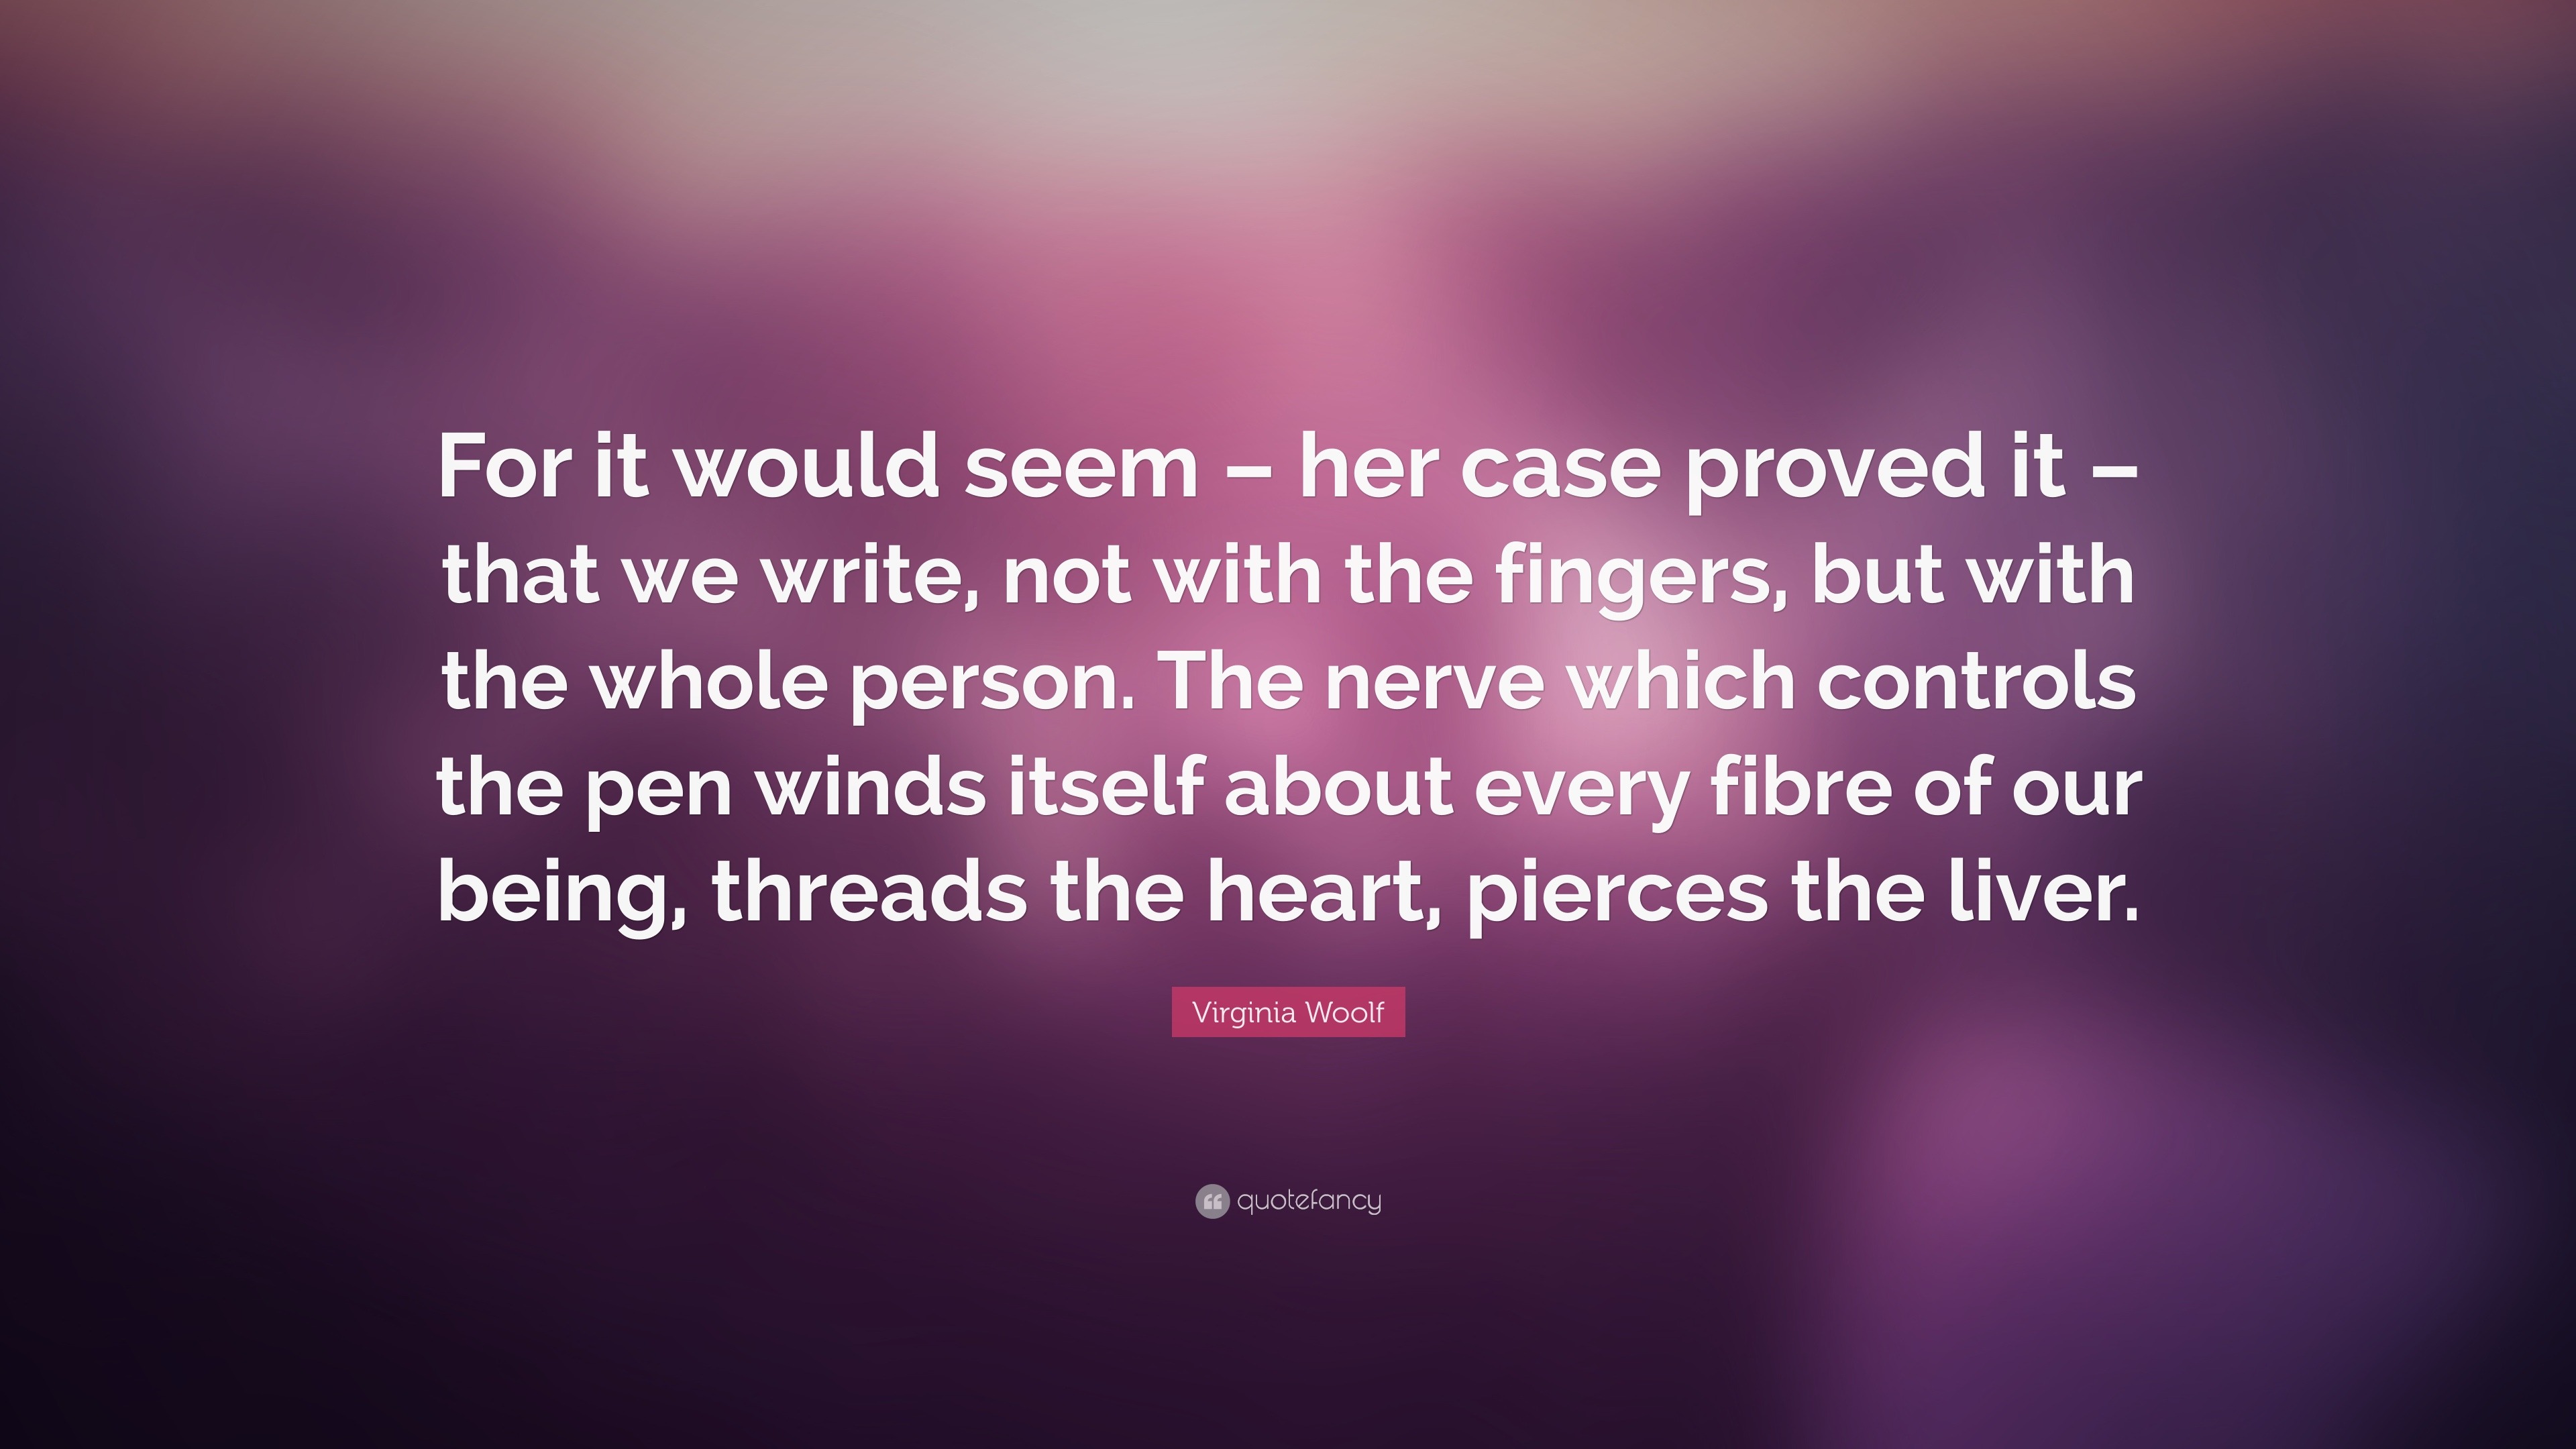 Virginia Woolf Quote: “For it would seem – her case proved it – that we ...